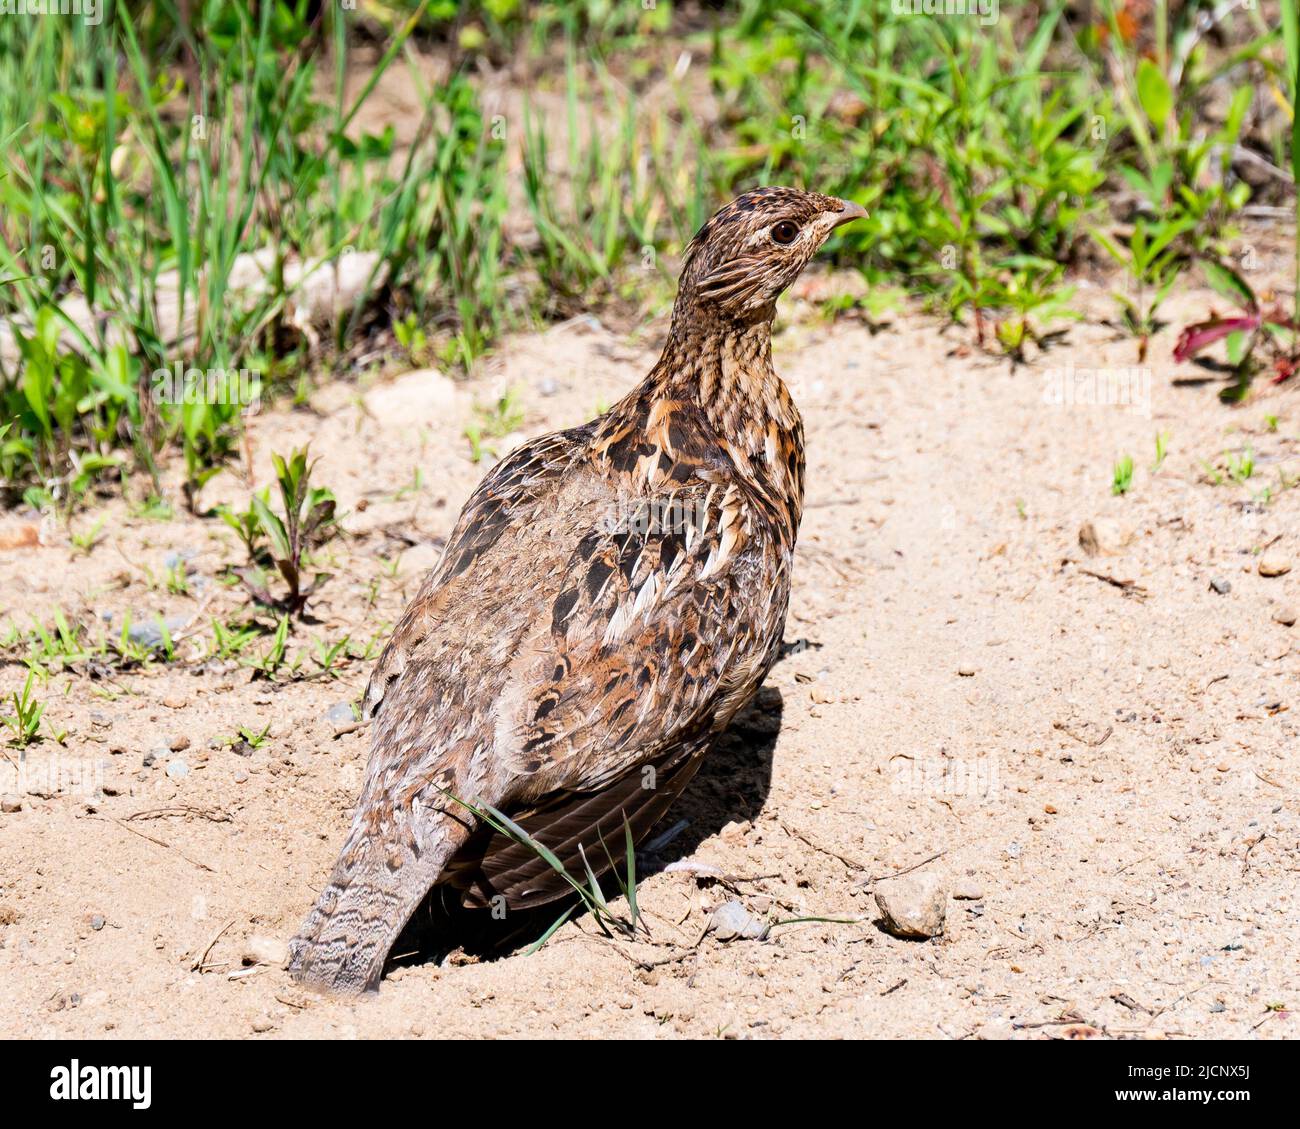 A Ruffed Grouse, Bonasa umbellus, standing in a sandy dust bath on the side of a gravel road in the Adirondack Mountains, NY USA wilderness. Stock Photo